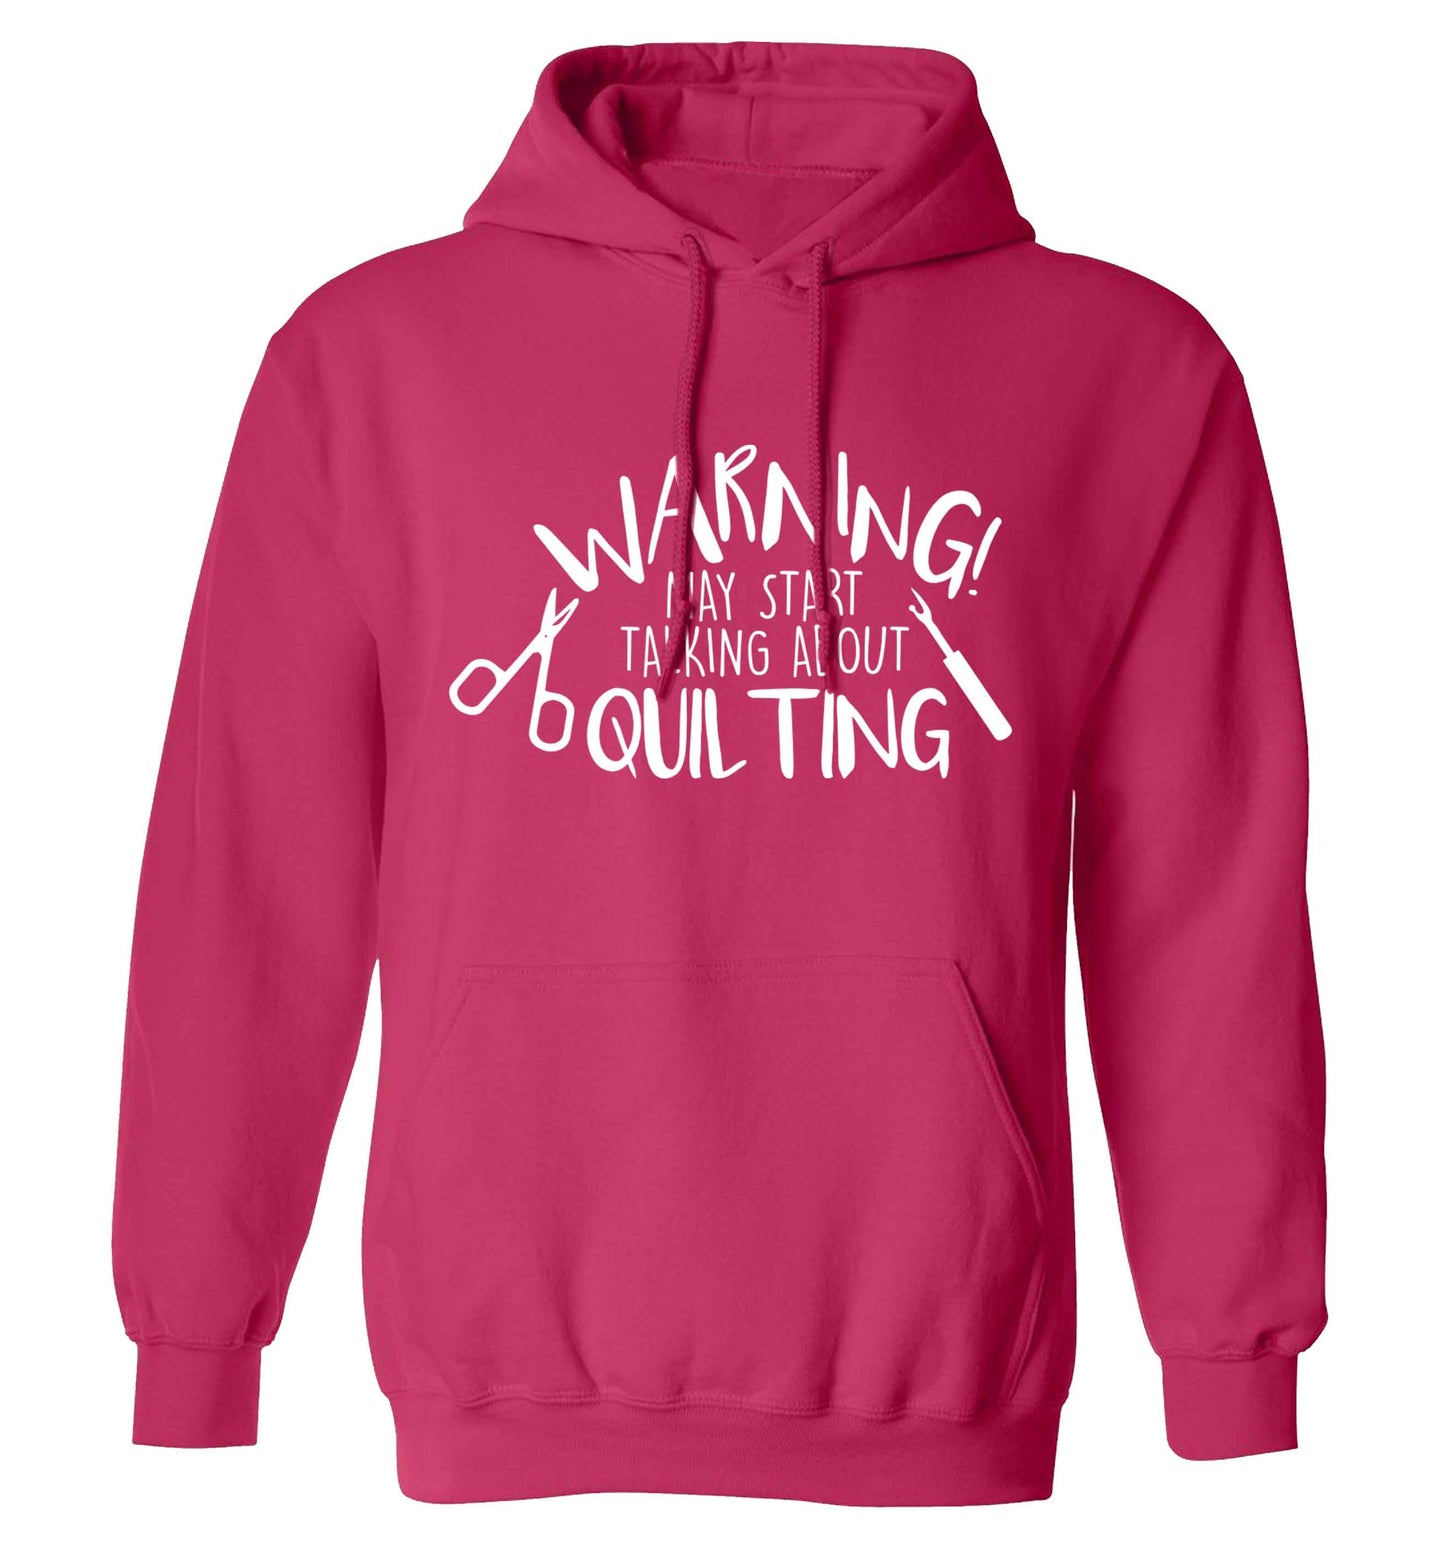 Warning may start talking about quilting adults unisex pink hoodie 2XL